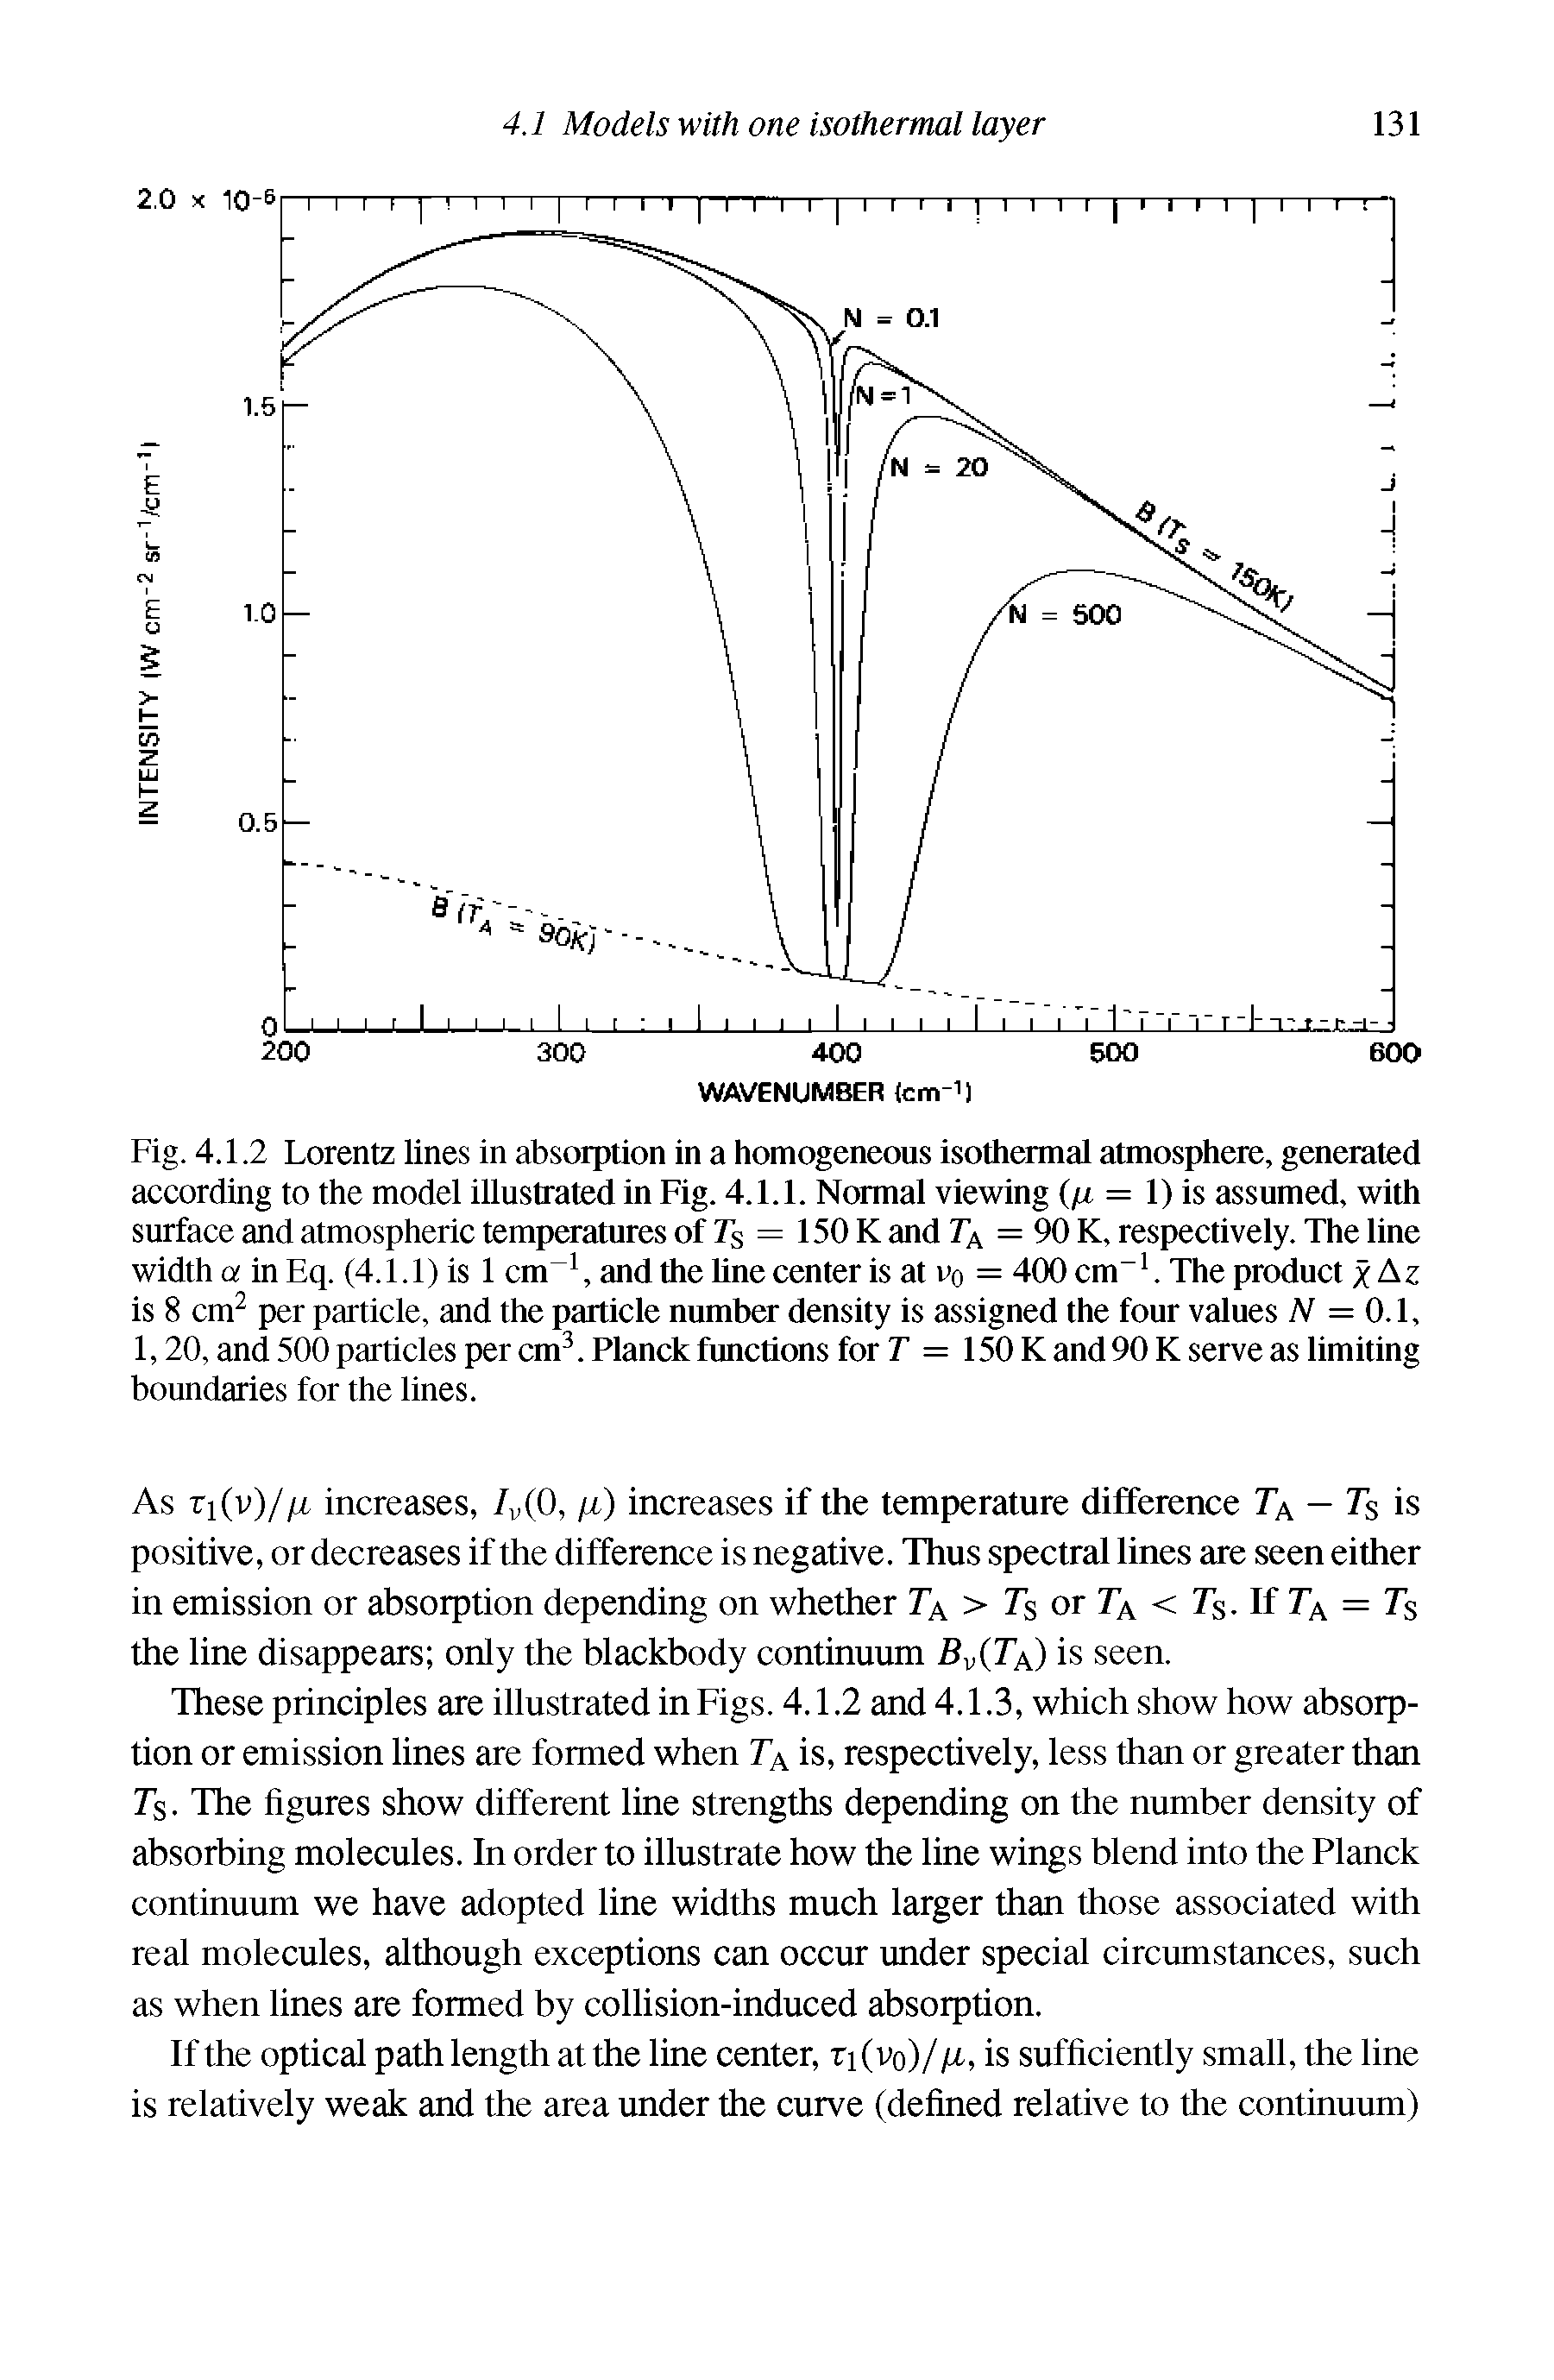 Fig. 4.1.2 Lorentz lines in absorption in a homogeneous isothermal atmosphere, generated according to the model illustrated in Fig. 4.1.1. Normal viewing fi= 1) is assumed, with surface and atmospheric temperatures of Ts = 150 K and 7 = 90 K, respectively. The line width O inEq. (4.1.1) is 1 cm and the line center is at vo = 400 cm . The product xAz is 8 cm per particle, and the particle number density is assigned the four values N = 0.1, 1,20, and 500 particles per cm. Planck functions for T = 150 K and 90 K serve as limiting boundaries for the lines.